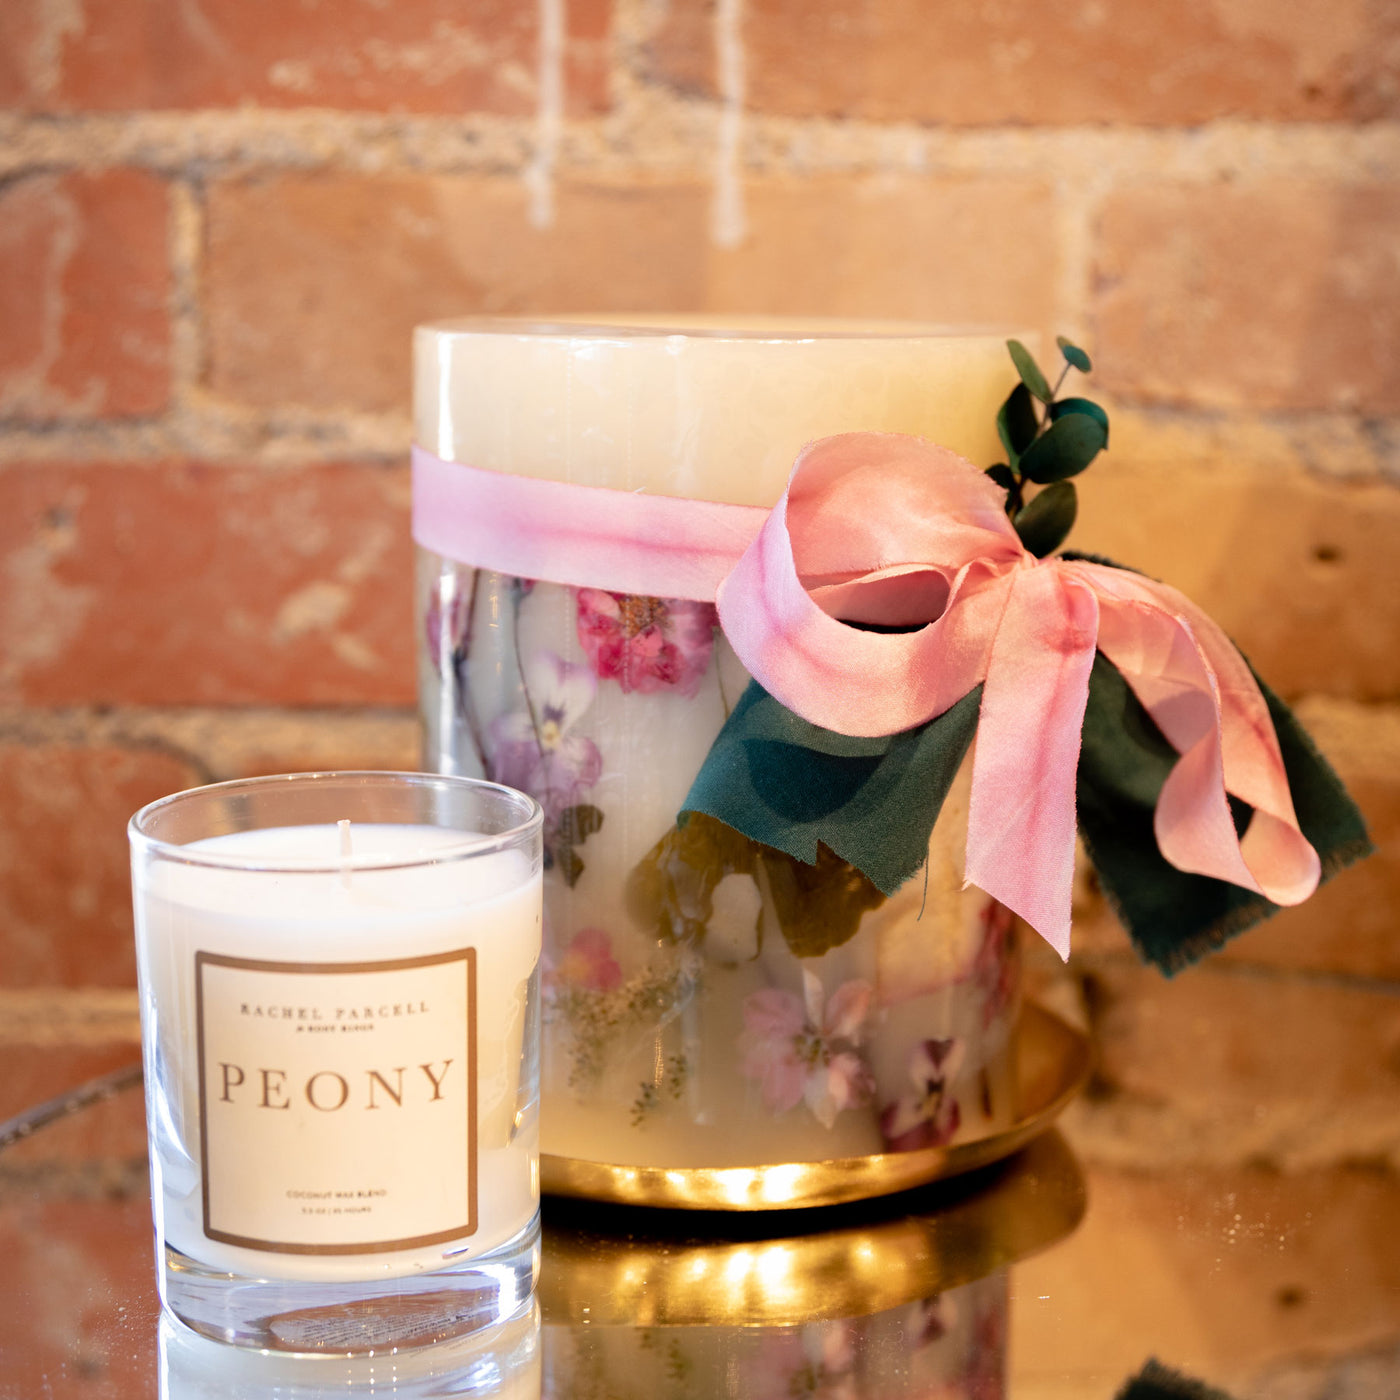 Rachel Parcell + Rosy Rings Peony Signature Glass Candle